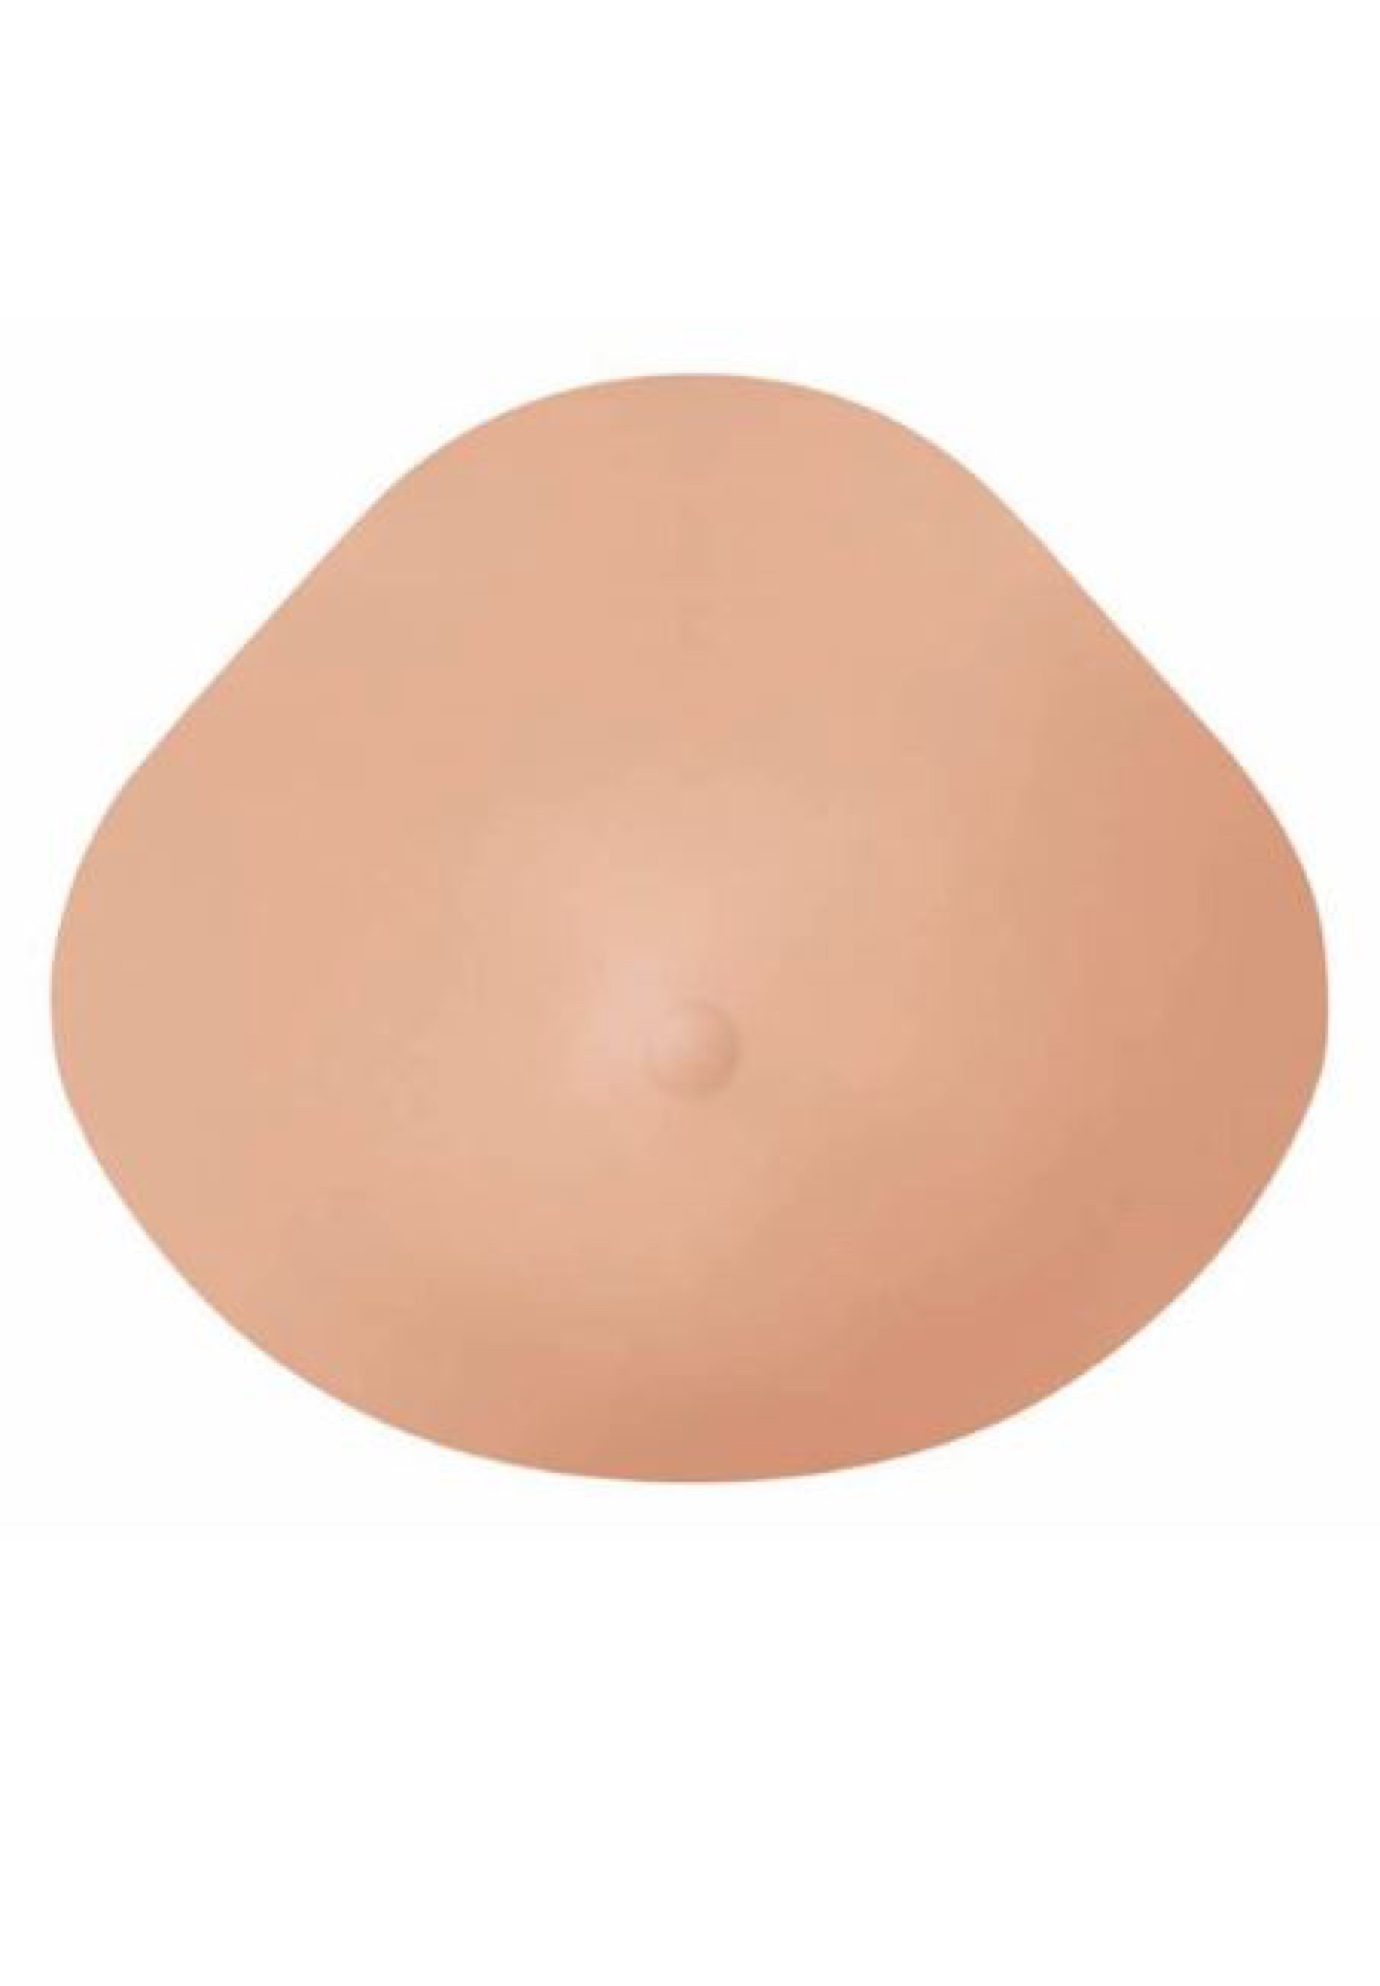 What Size Breast Forms Should I Get